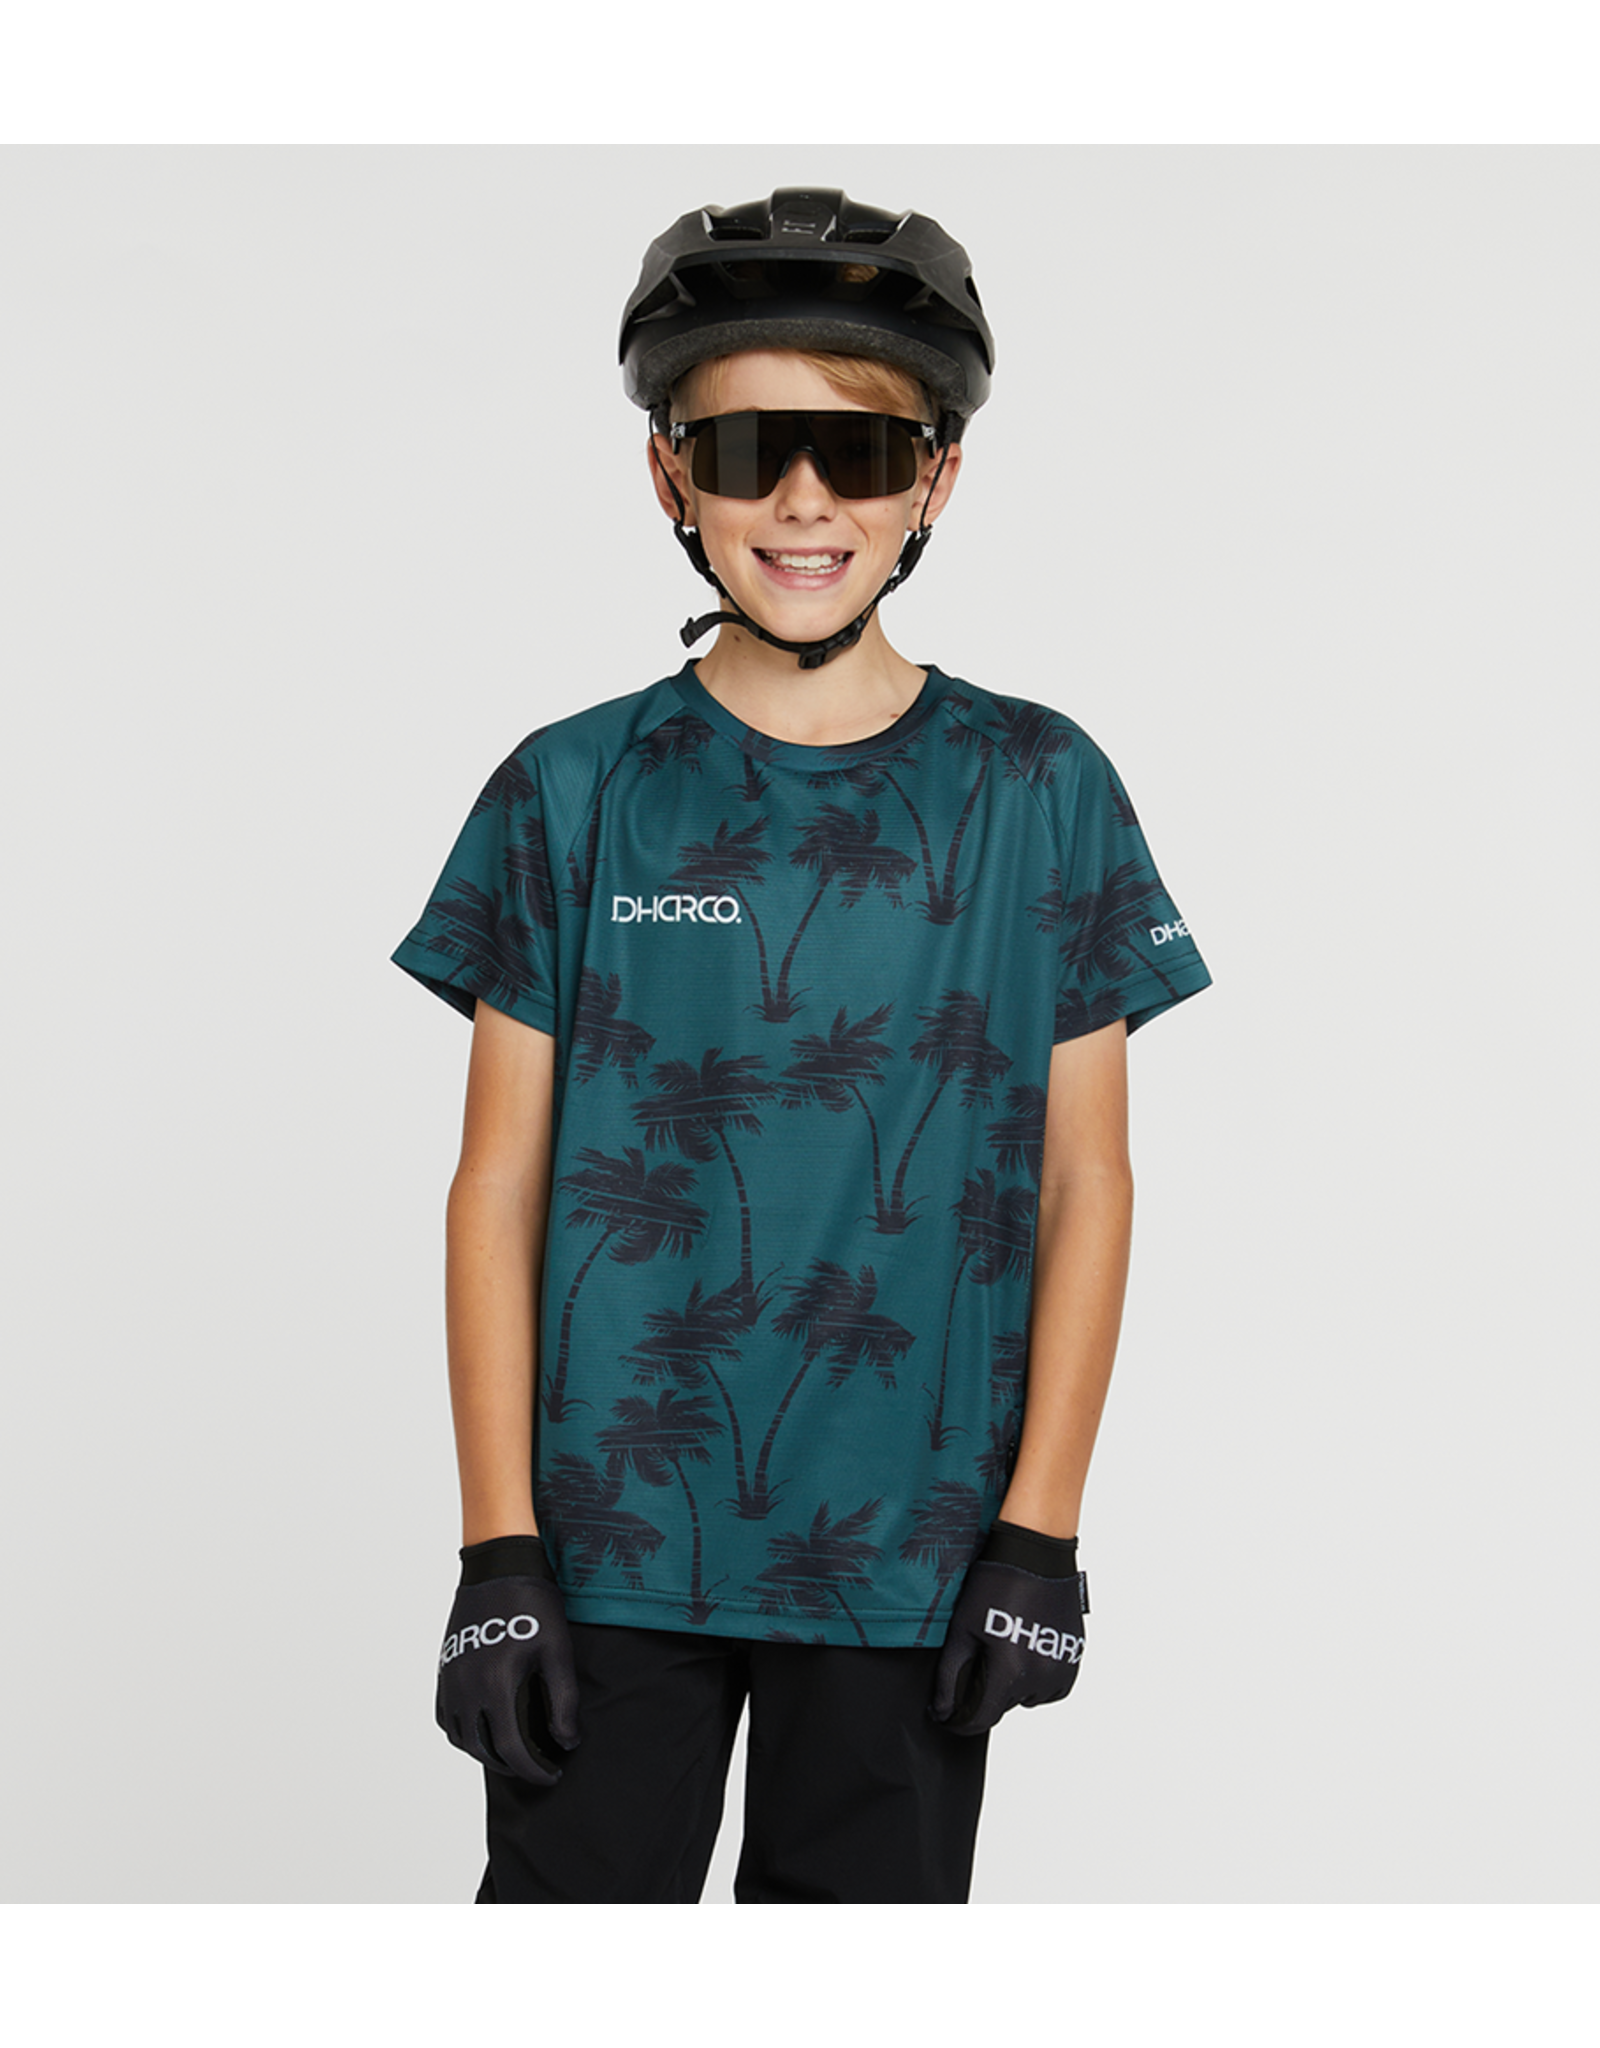 DHaRCO Dharco Youth SS Jersey Dust Til Dawn